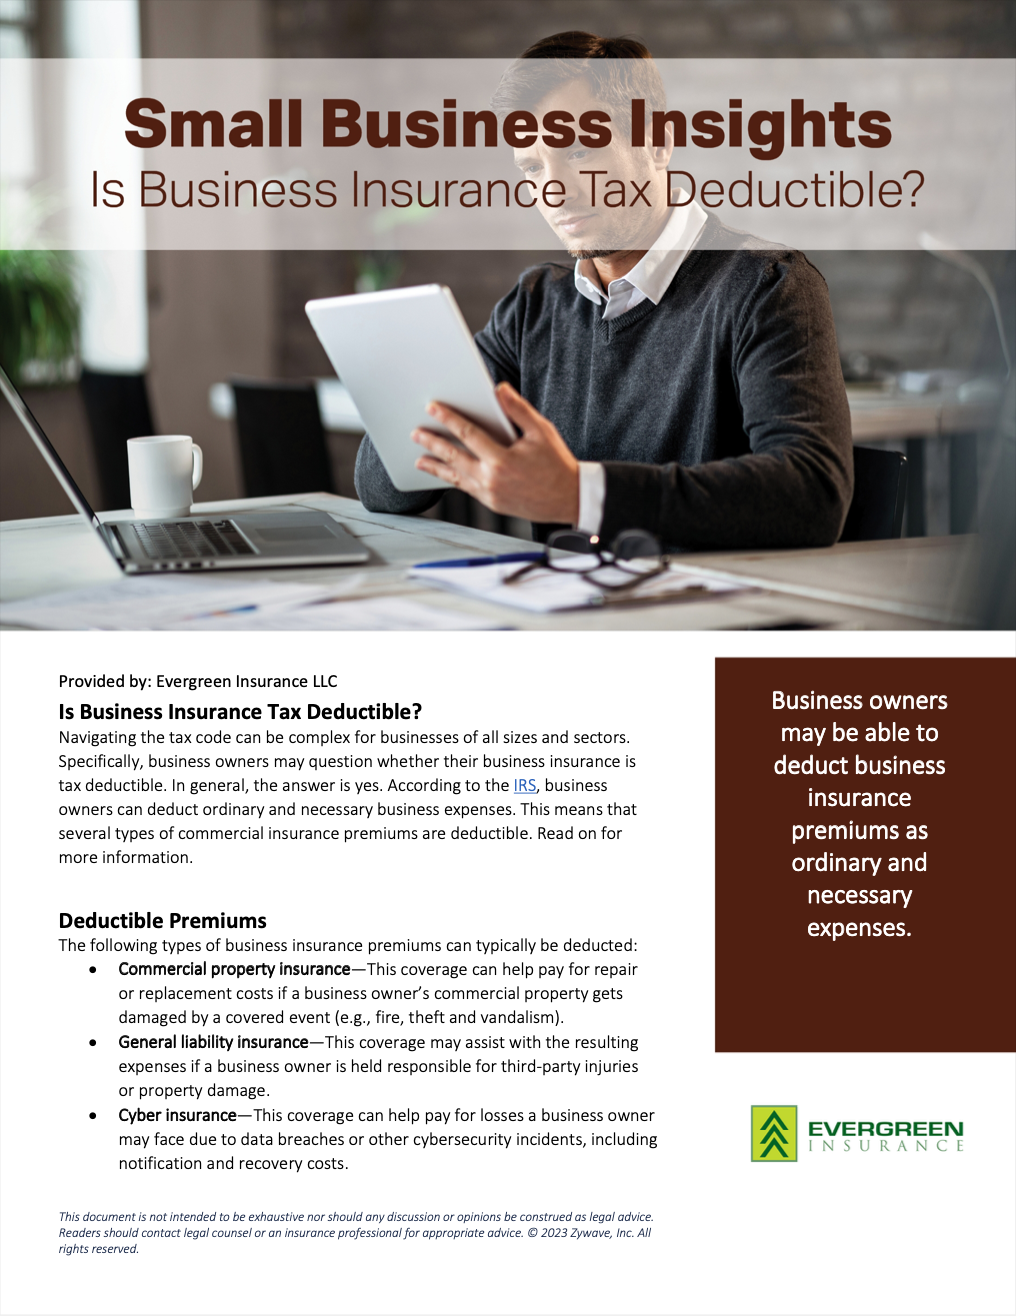 Is business insurance tax-deductible?